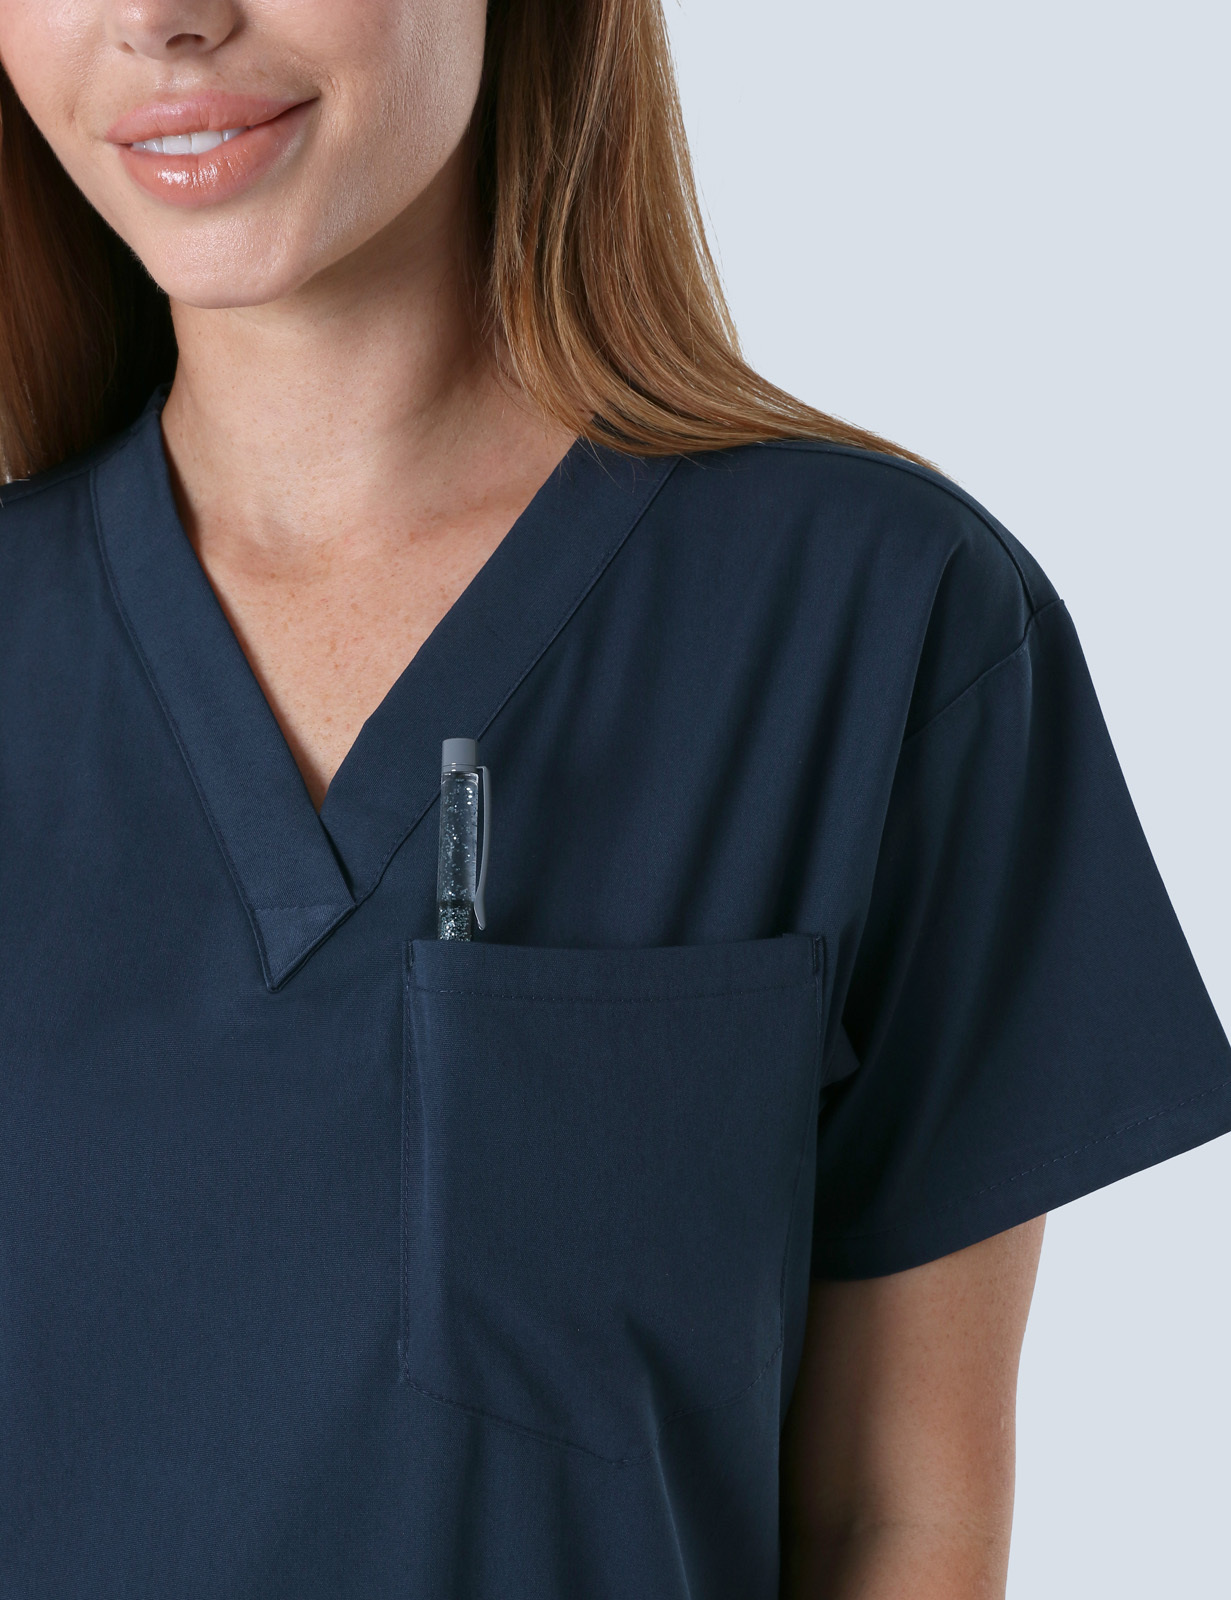 Gladstone Hospital - ED Nurse Practitioner (4 Pocket Scrub Top and Cargo Pants in Navy incl Logos)